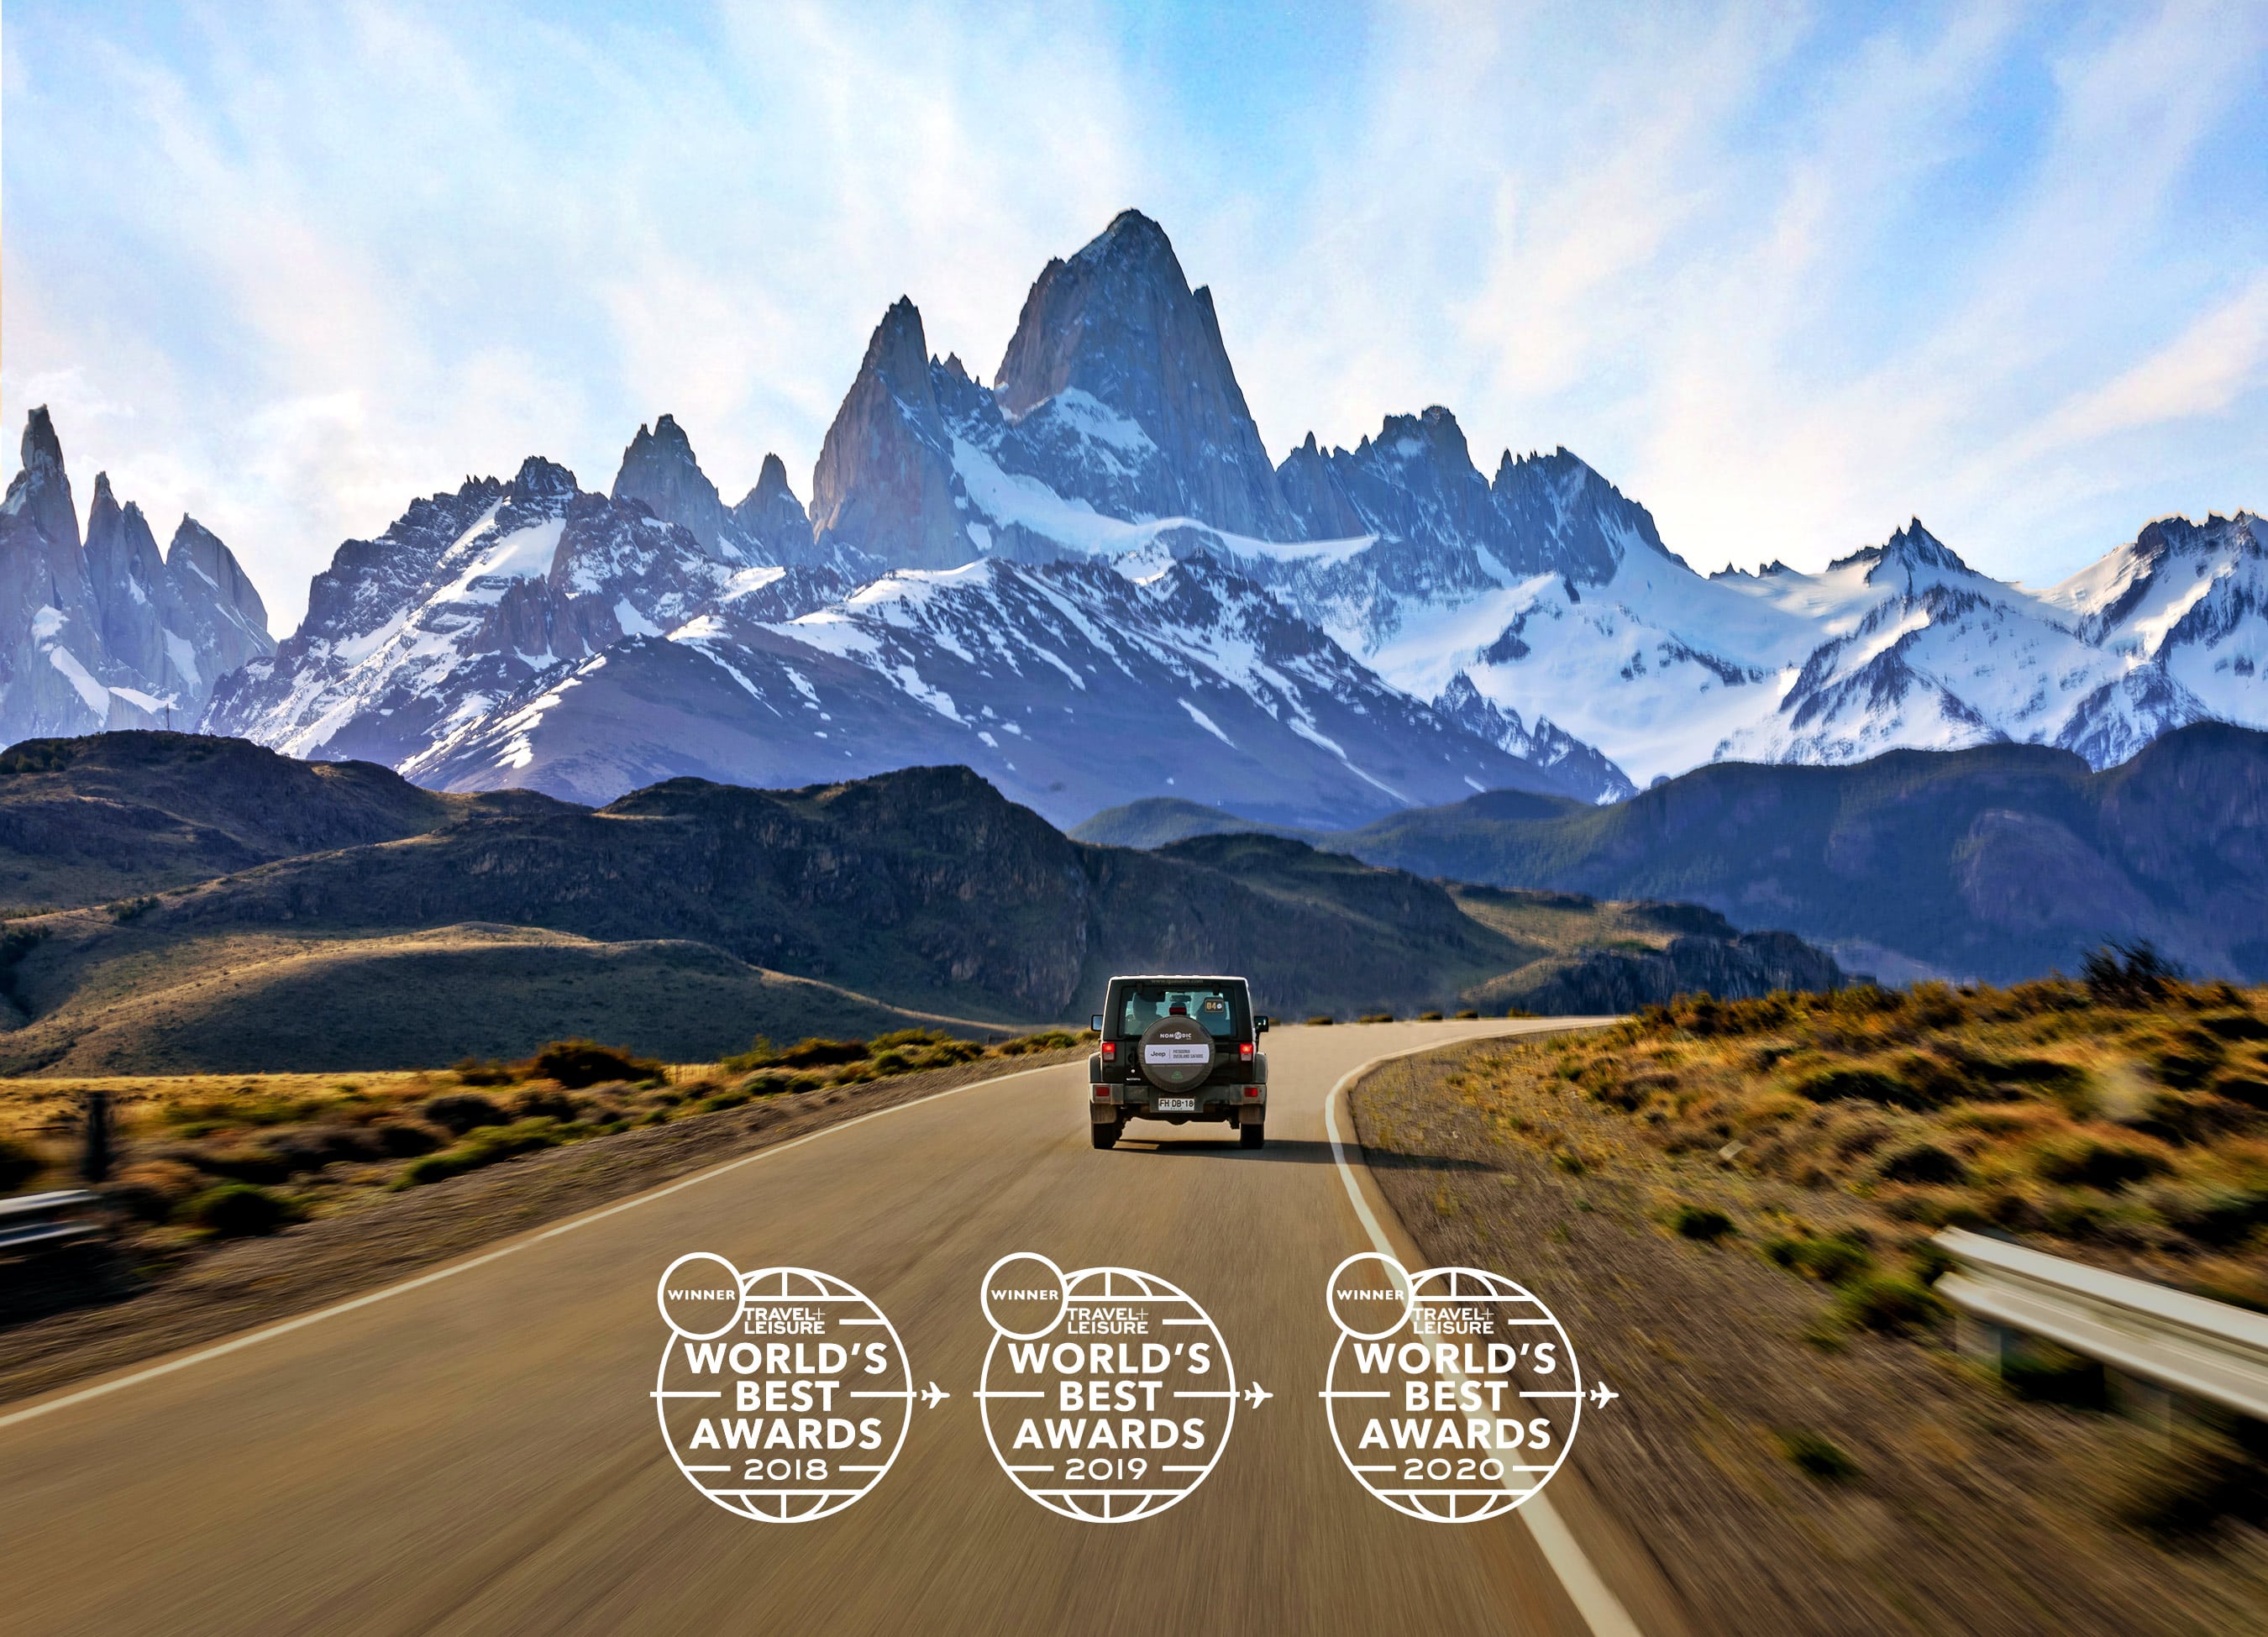 Patagonia is a year-round destination